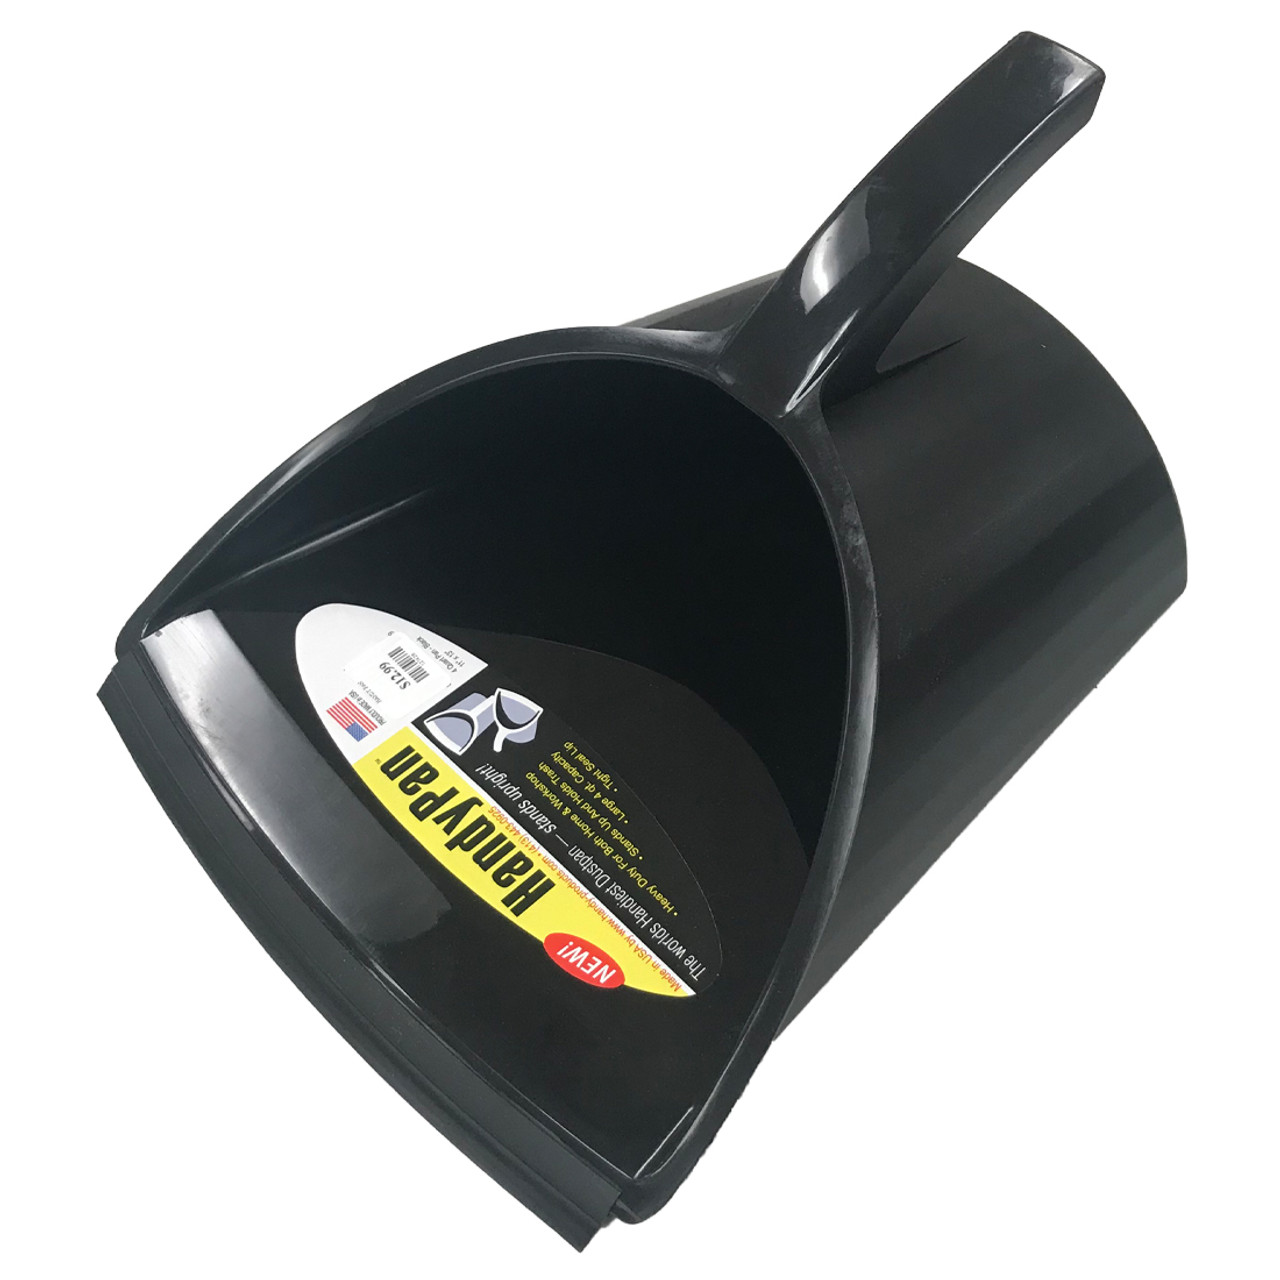 Handy Pan - Recycled Black Plastic - Large Capacity Heavy Duty Dust Pan! Made in USA! Great for Home, Shop, Garage, Waterproof, Stackable, Stands Up.